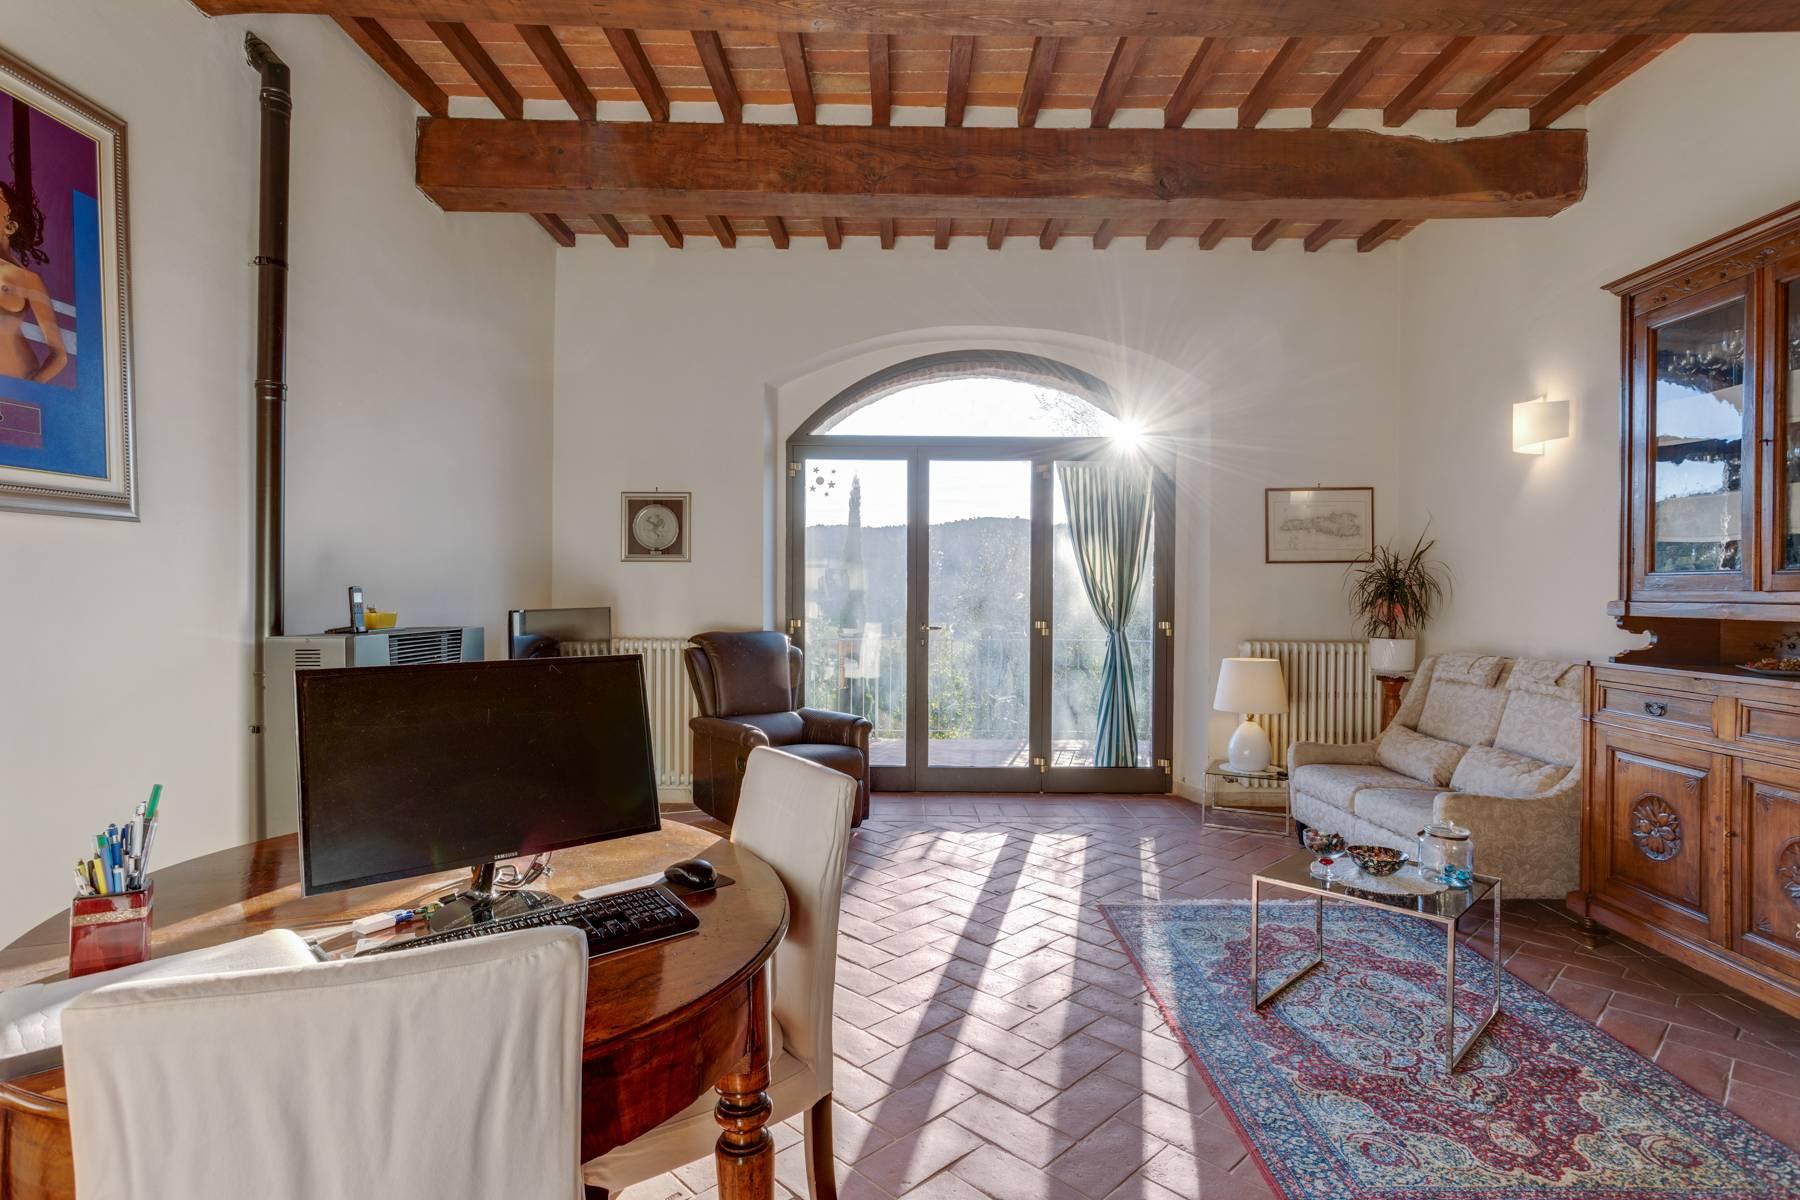 Beautiful country house with agriturismo and vineyard walking distance from Montepulciano - 12